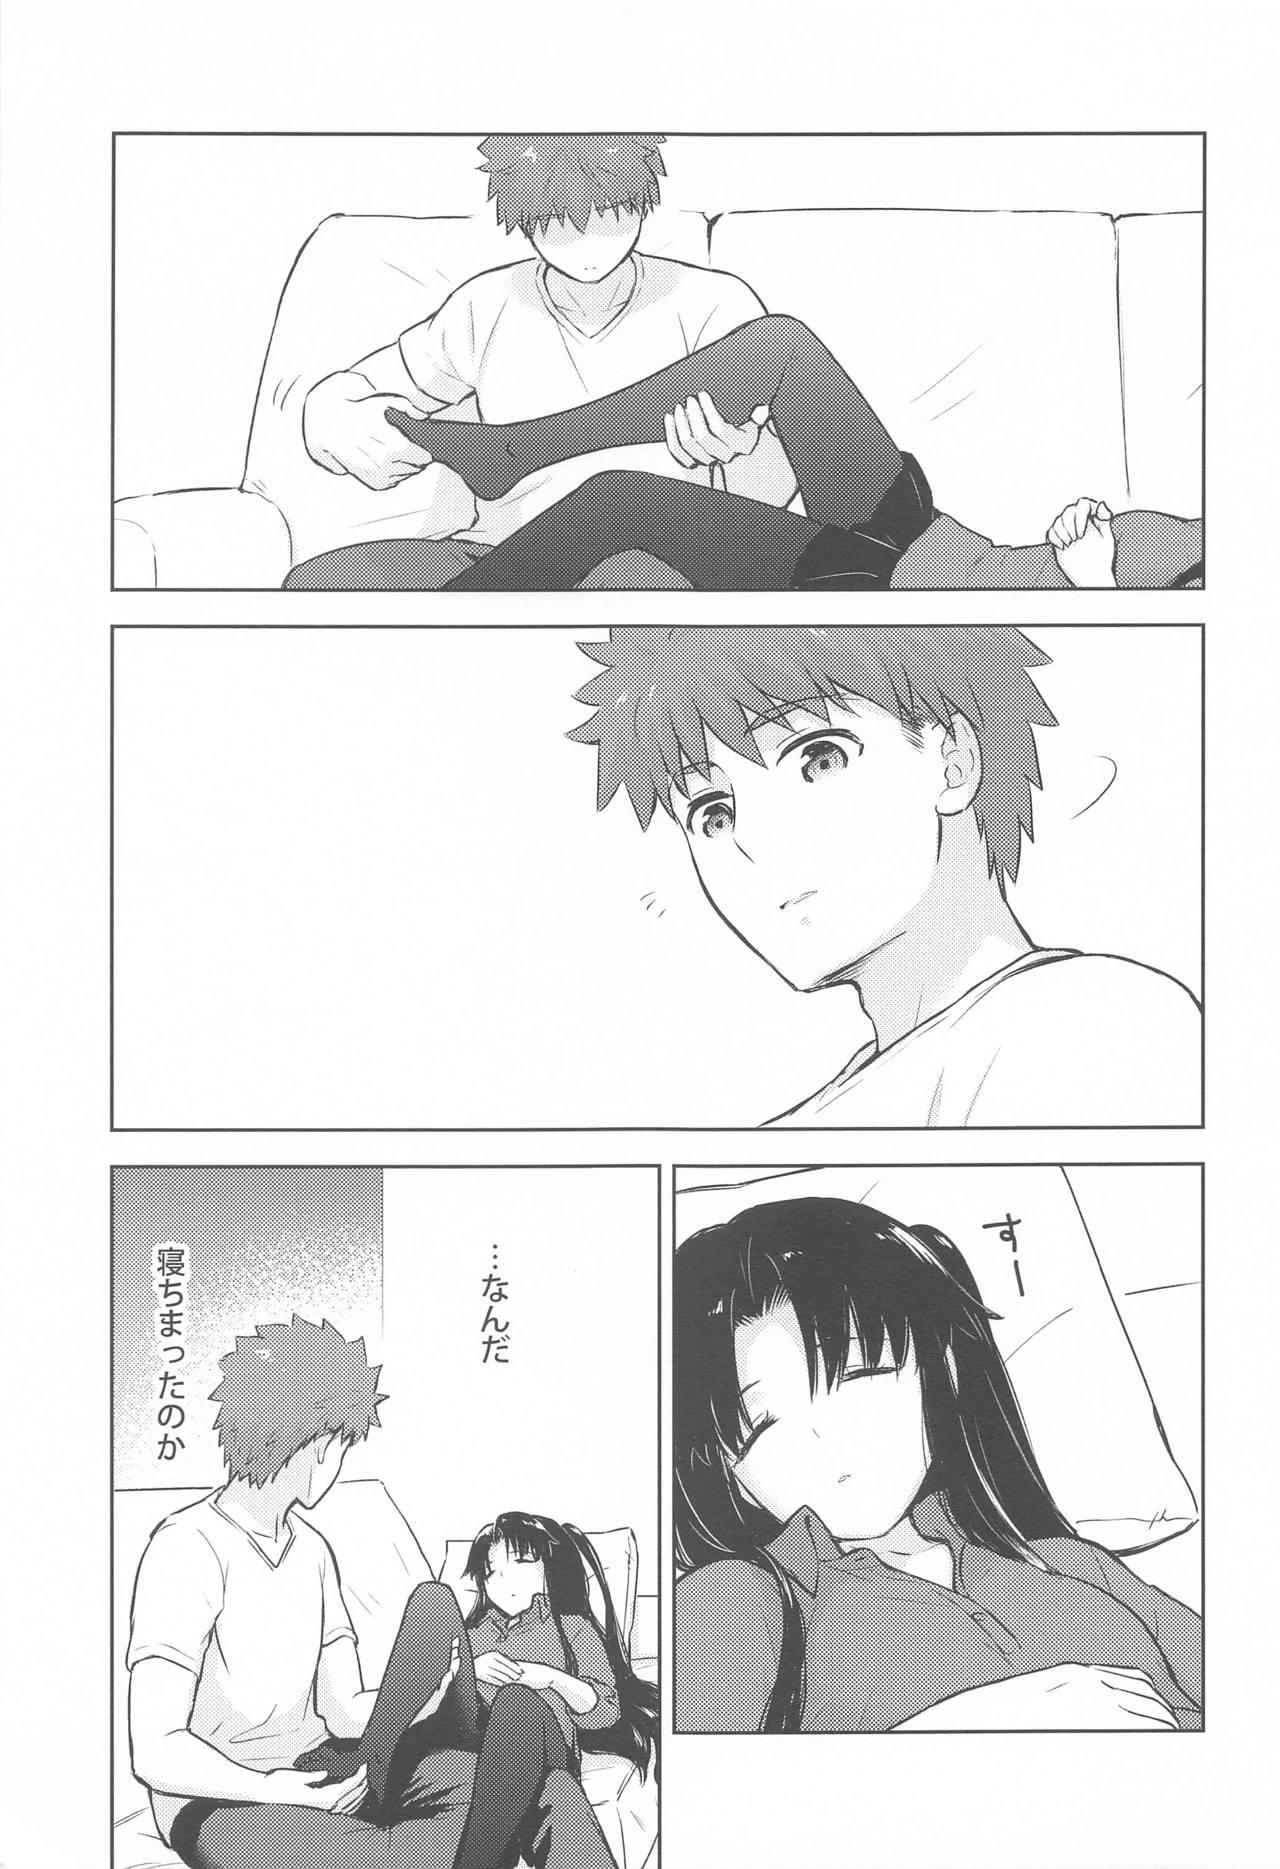 Parody Second Semester - Fate stay night Red - Page 10